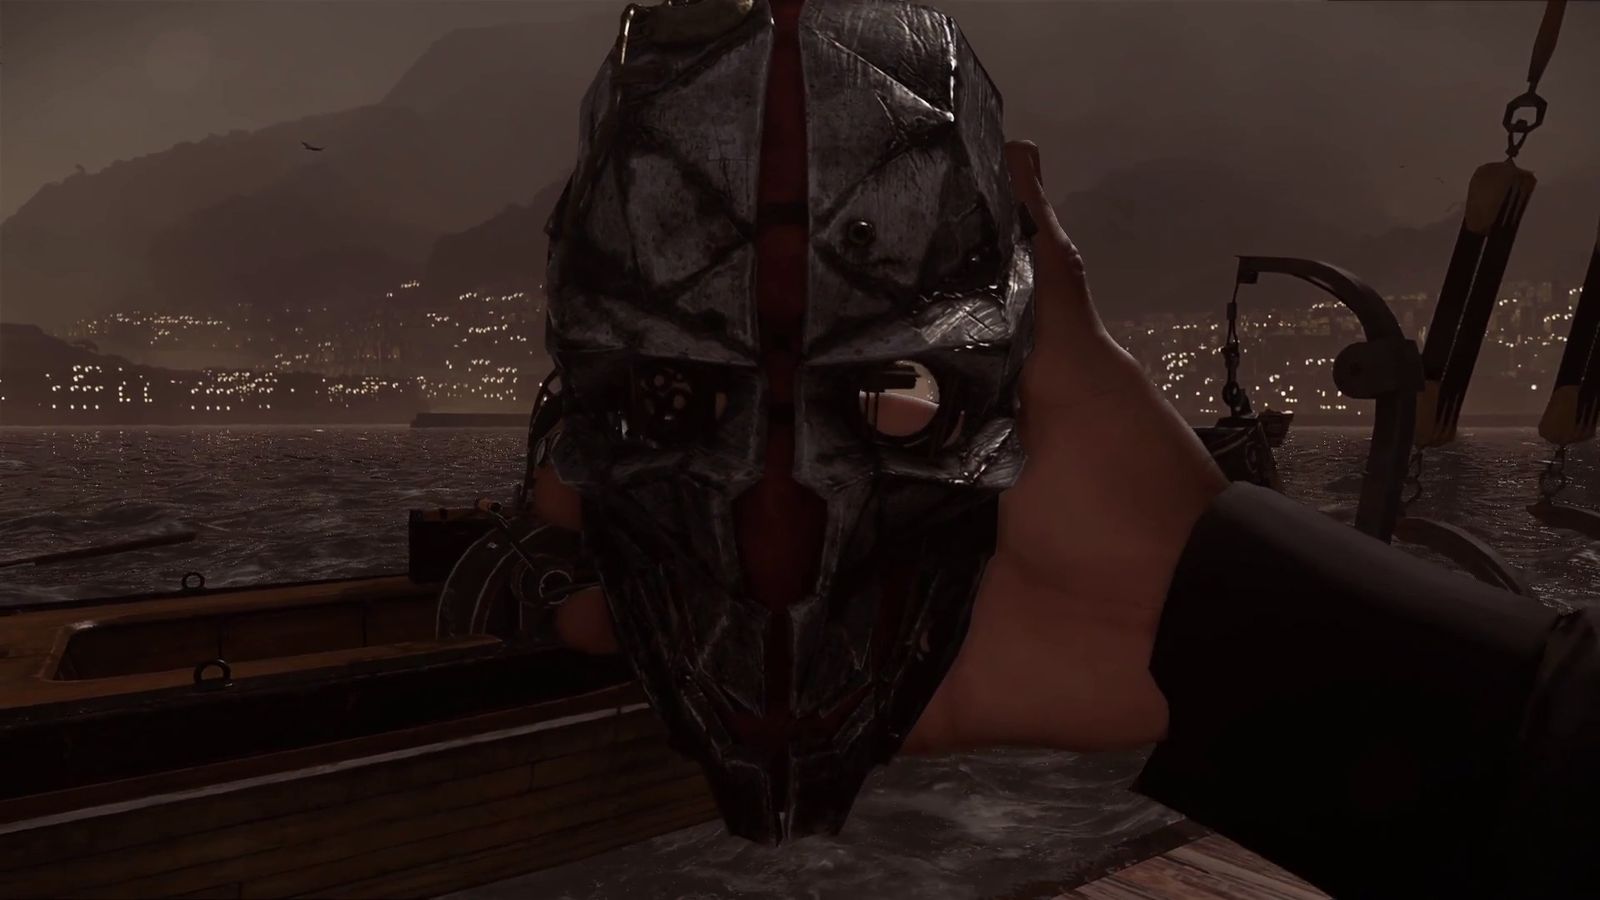 Corvo Gameplay Trailer Released For “Dishonored 2” - 